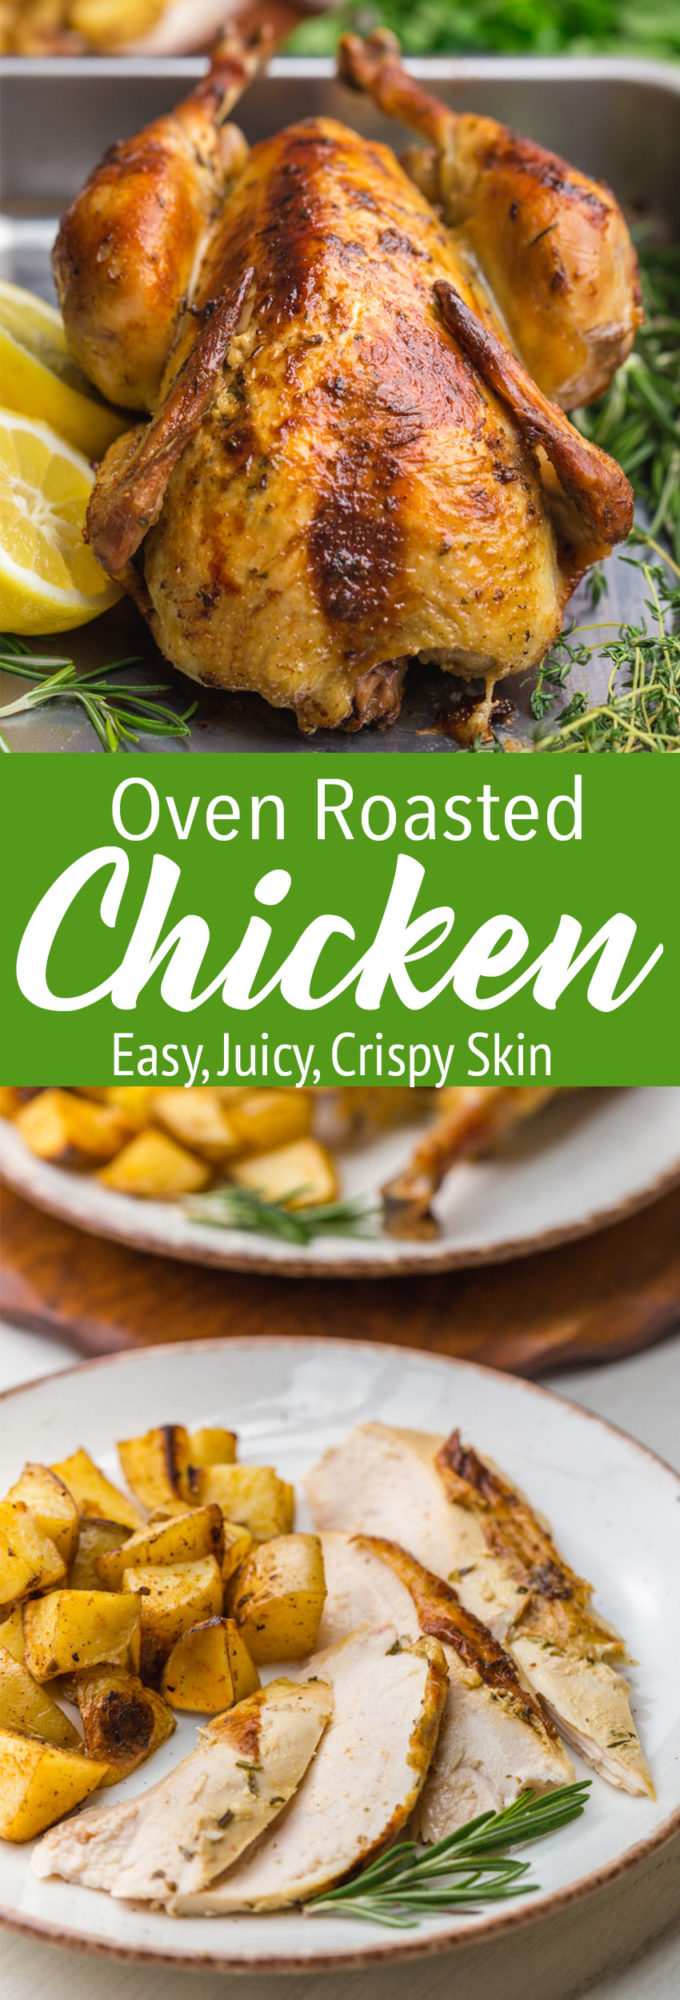 Deliciously oven roasted chicken, it is easy, juicy, and crispy skinned